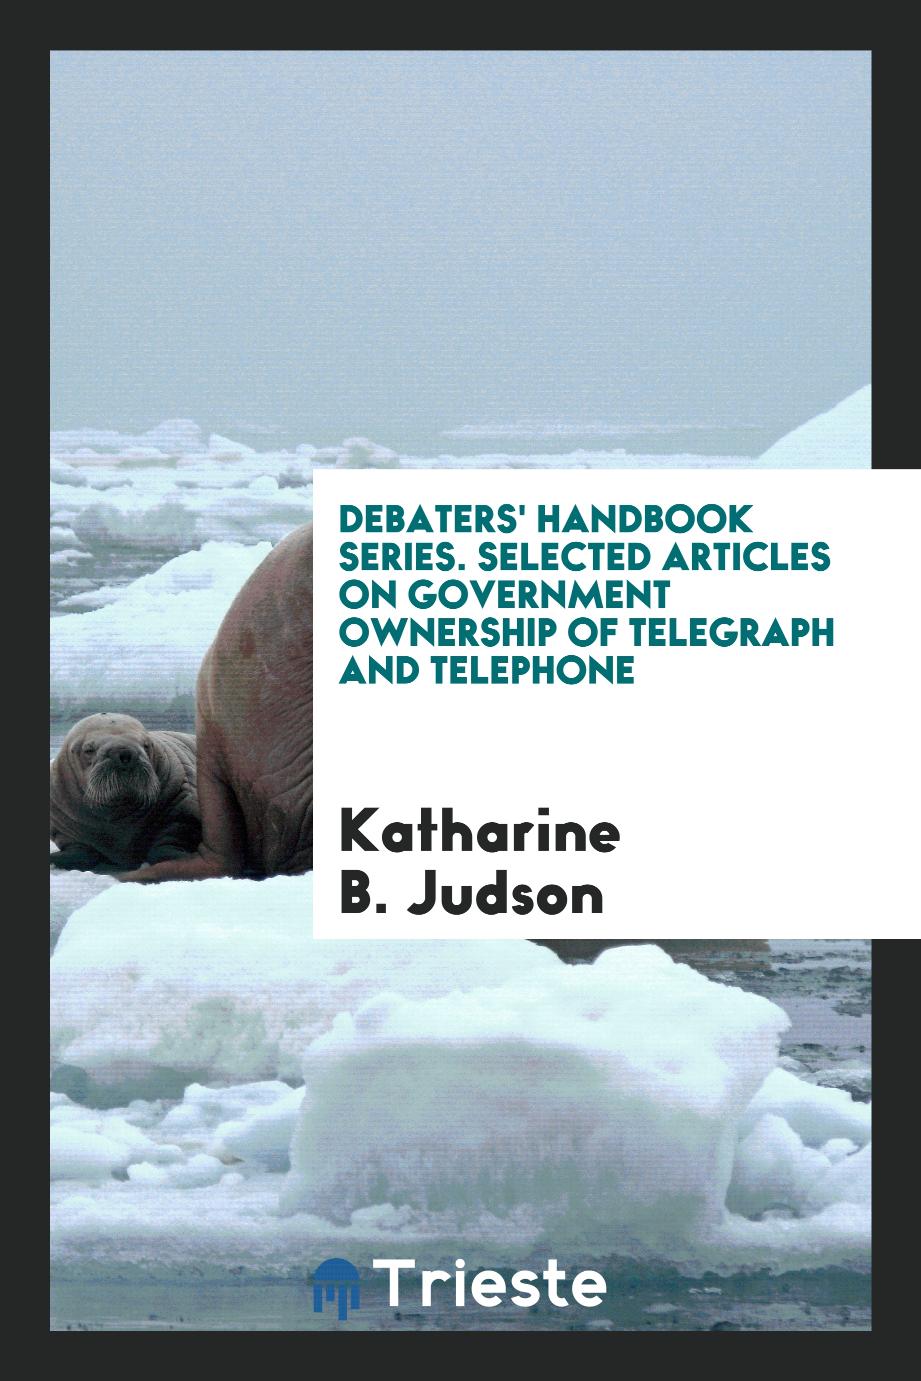 Debaters' Handbook Series. Selected Articles on Government Ownership of Telegraph and Telephone